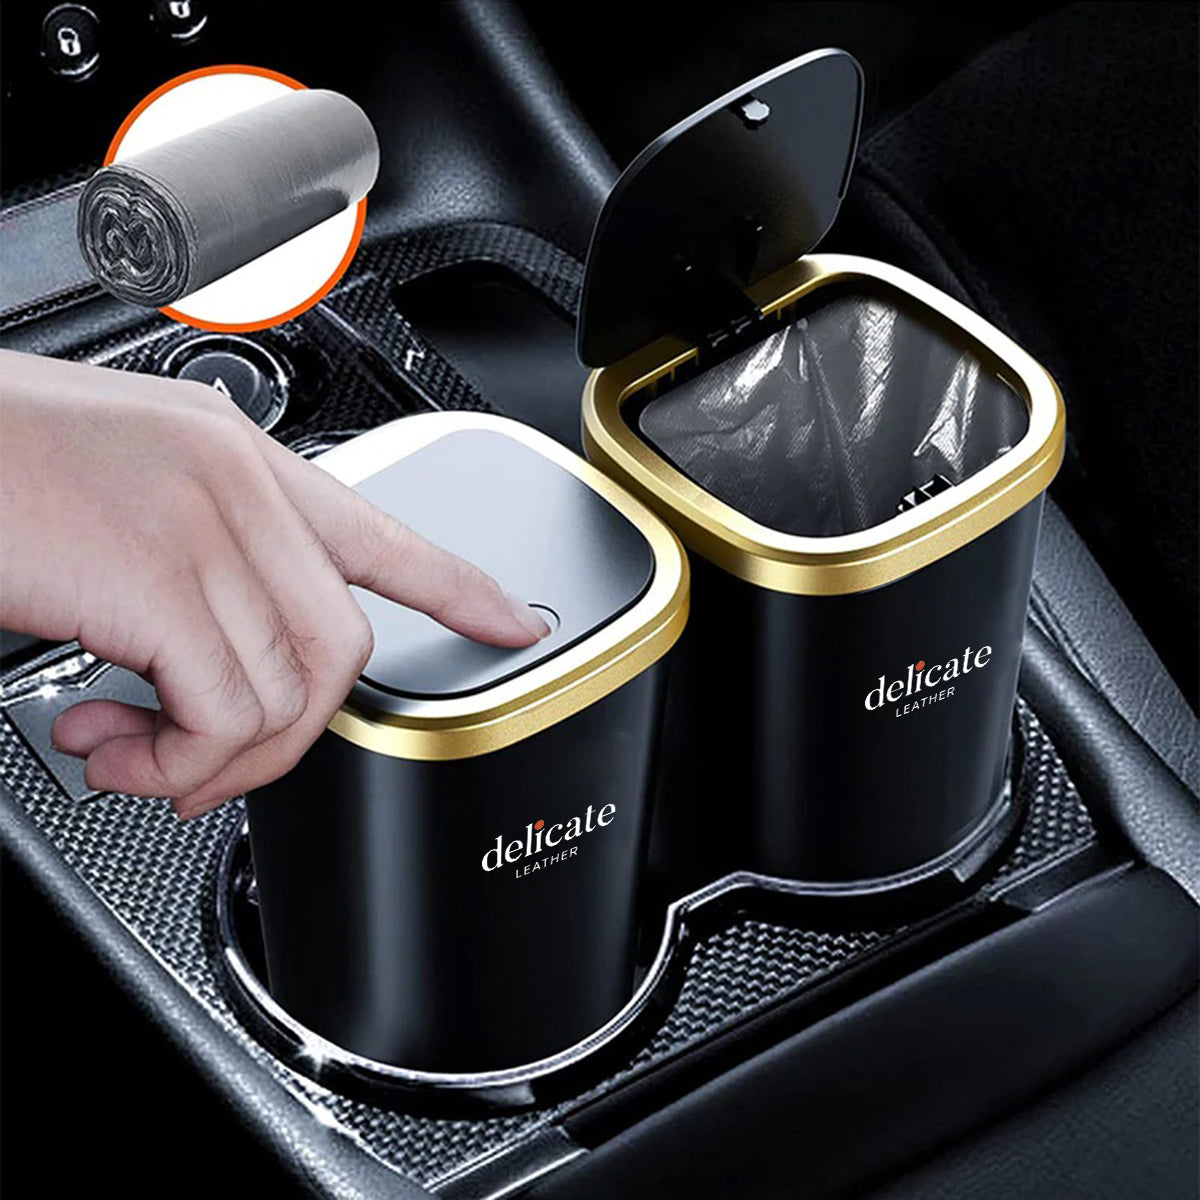 Car Trash Cans, Custom For Your Cars, Compact & Durable Car Accessories for Interior Use 2 Pack, Practical Car Organizers and Storage Cups with Pop-Up Open, Car Accessories LI11993 - Delicate Leather